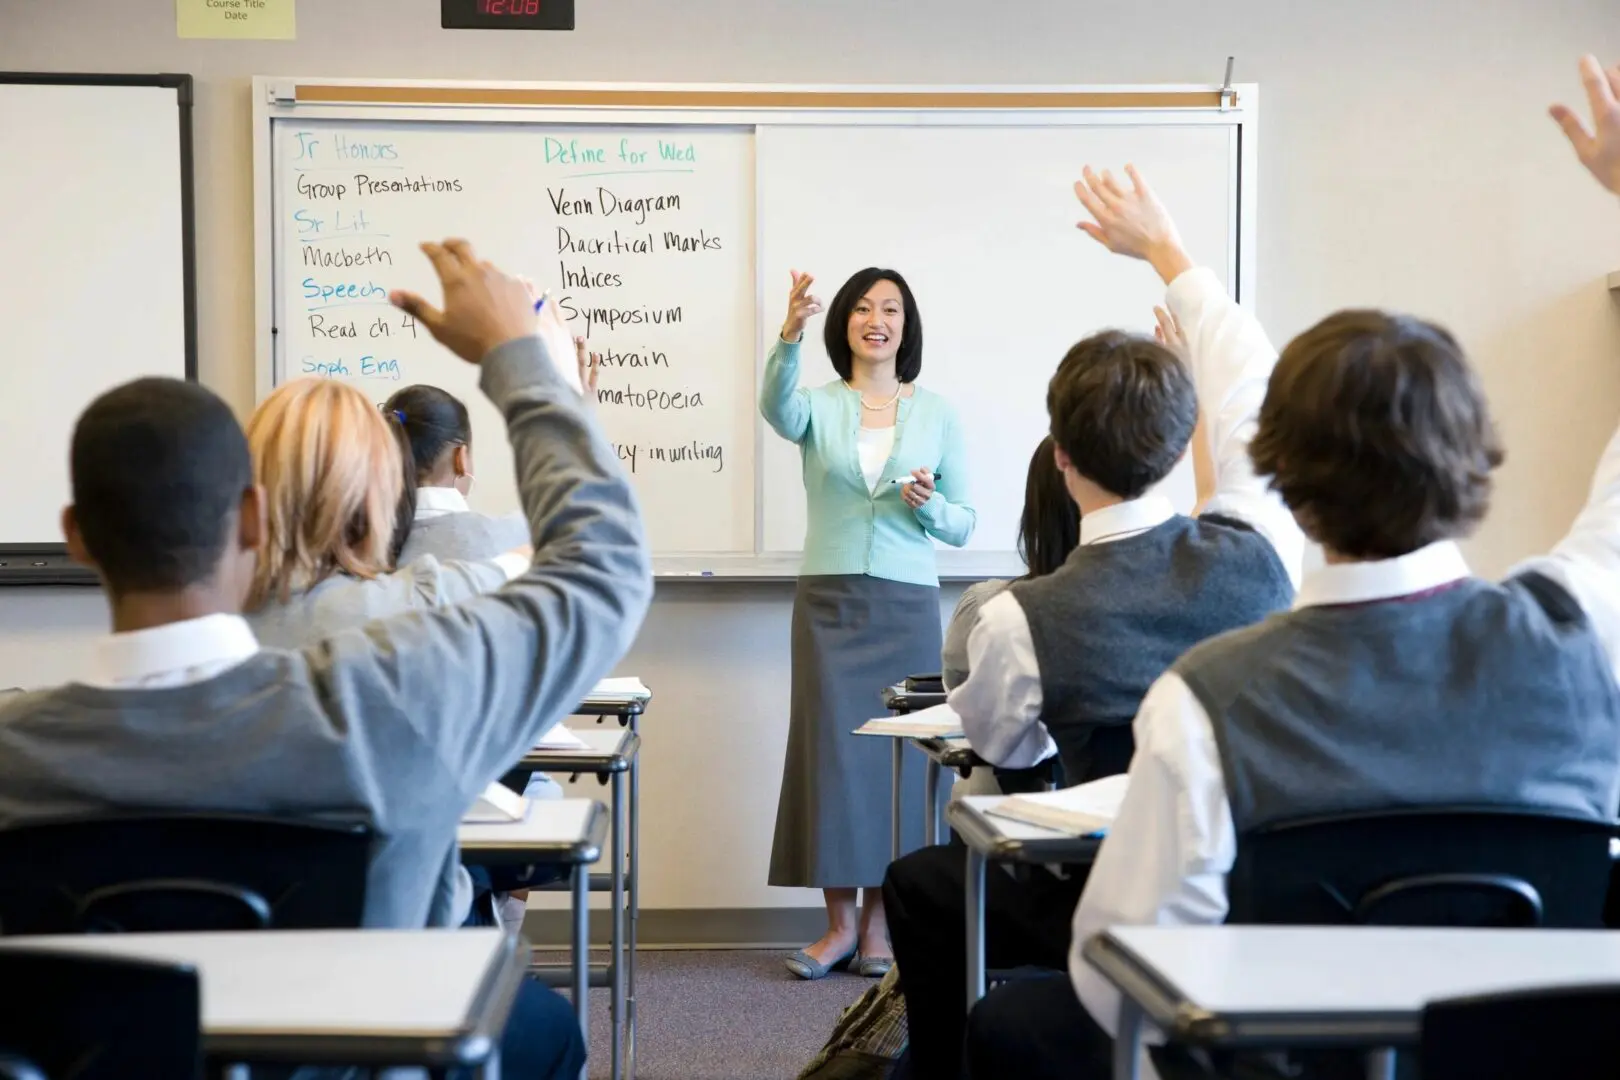 A woman standing in front of a class room